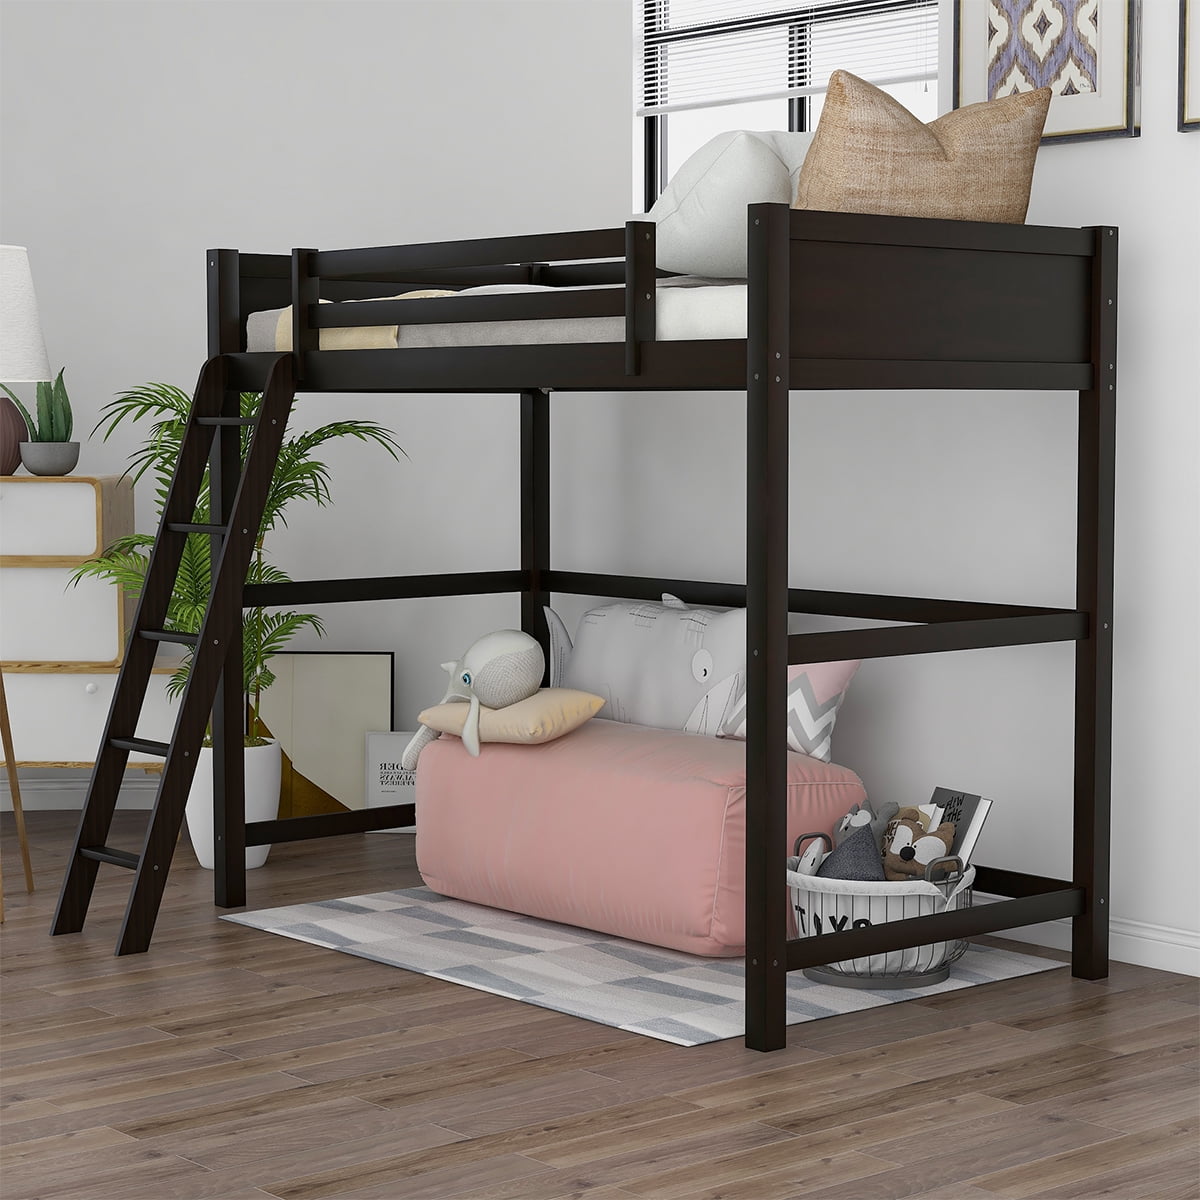 Sentern Solid Wood Twin Loft Bed With, Dorm Room Bunk Bed Ladders